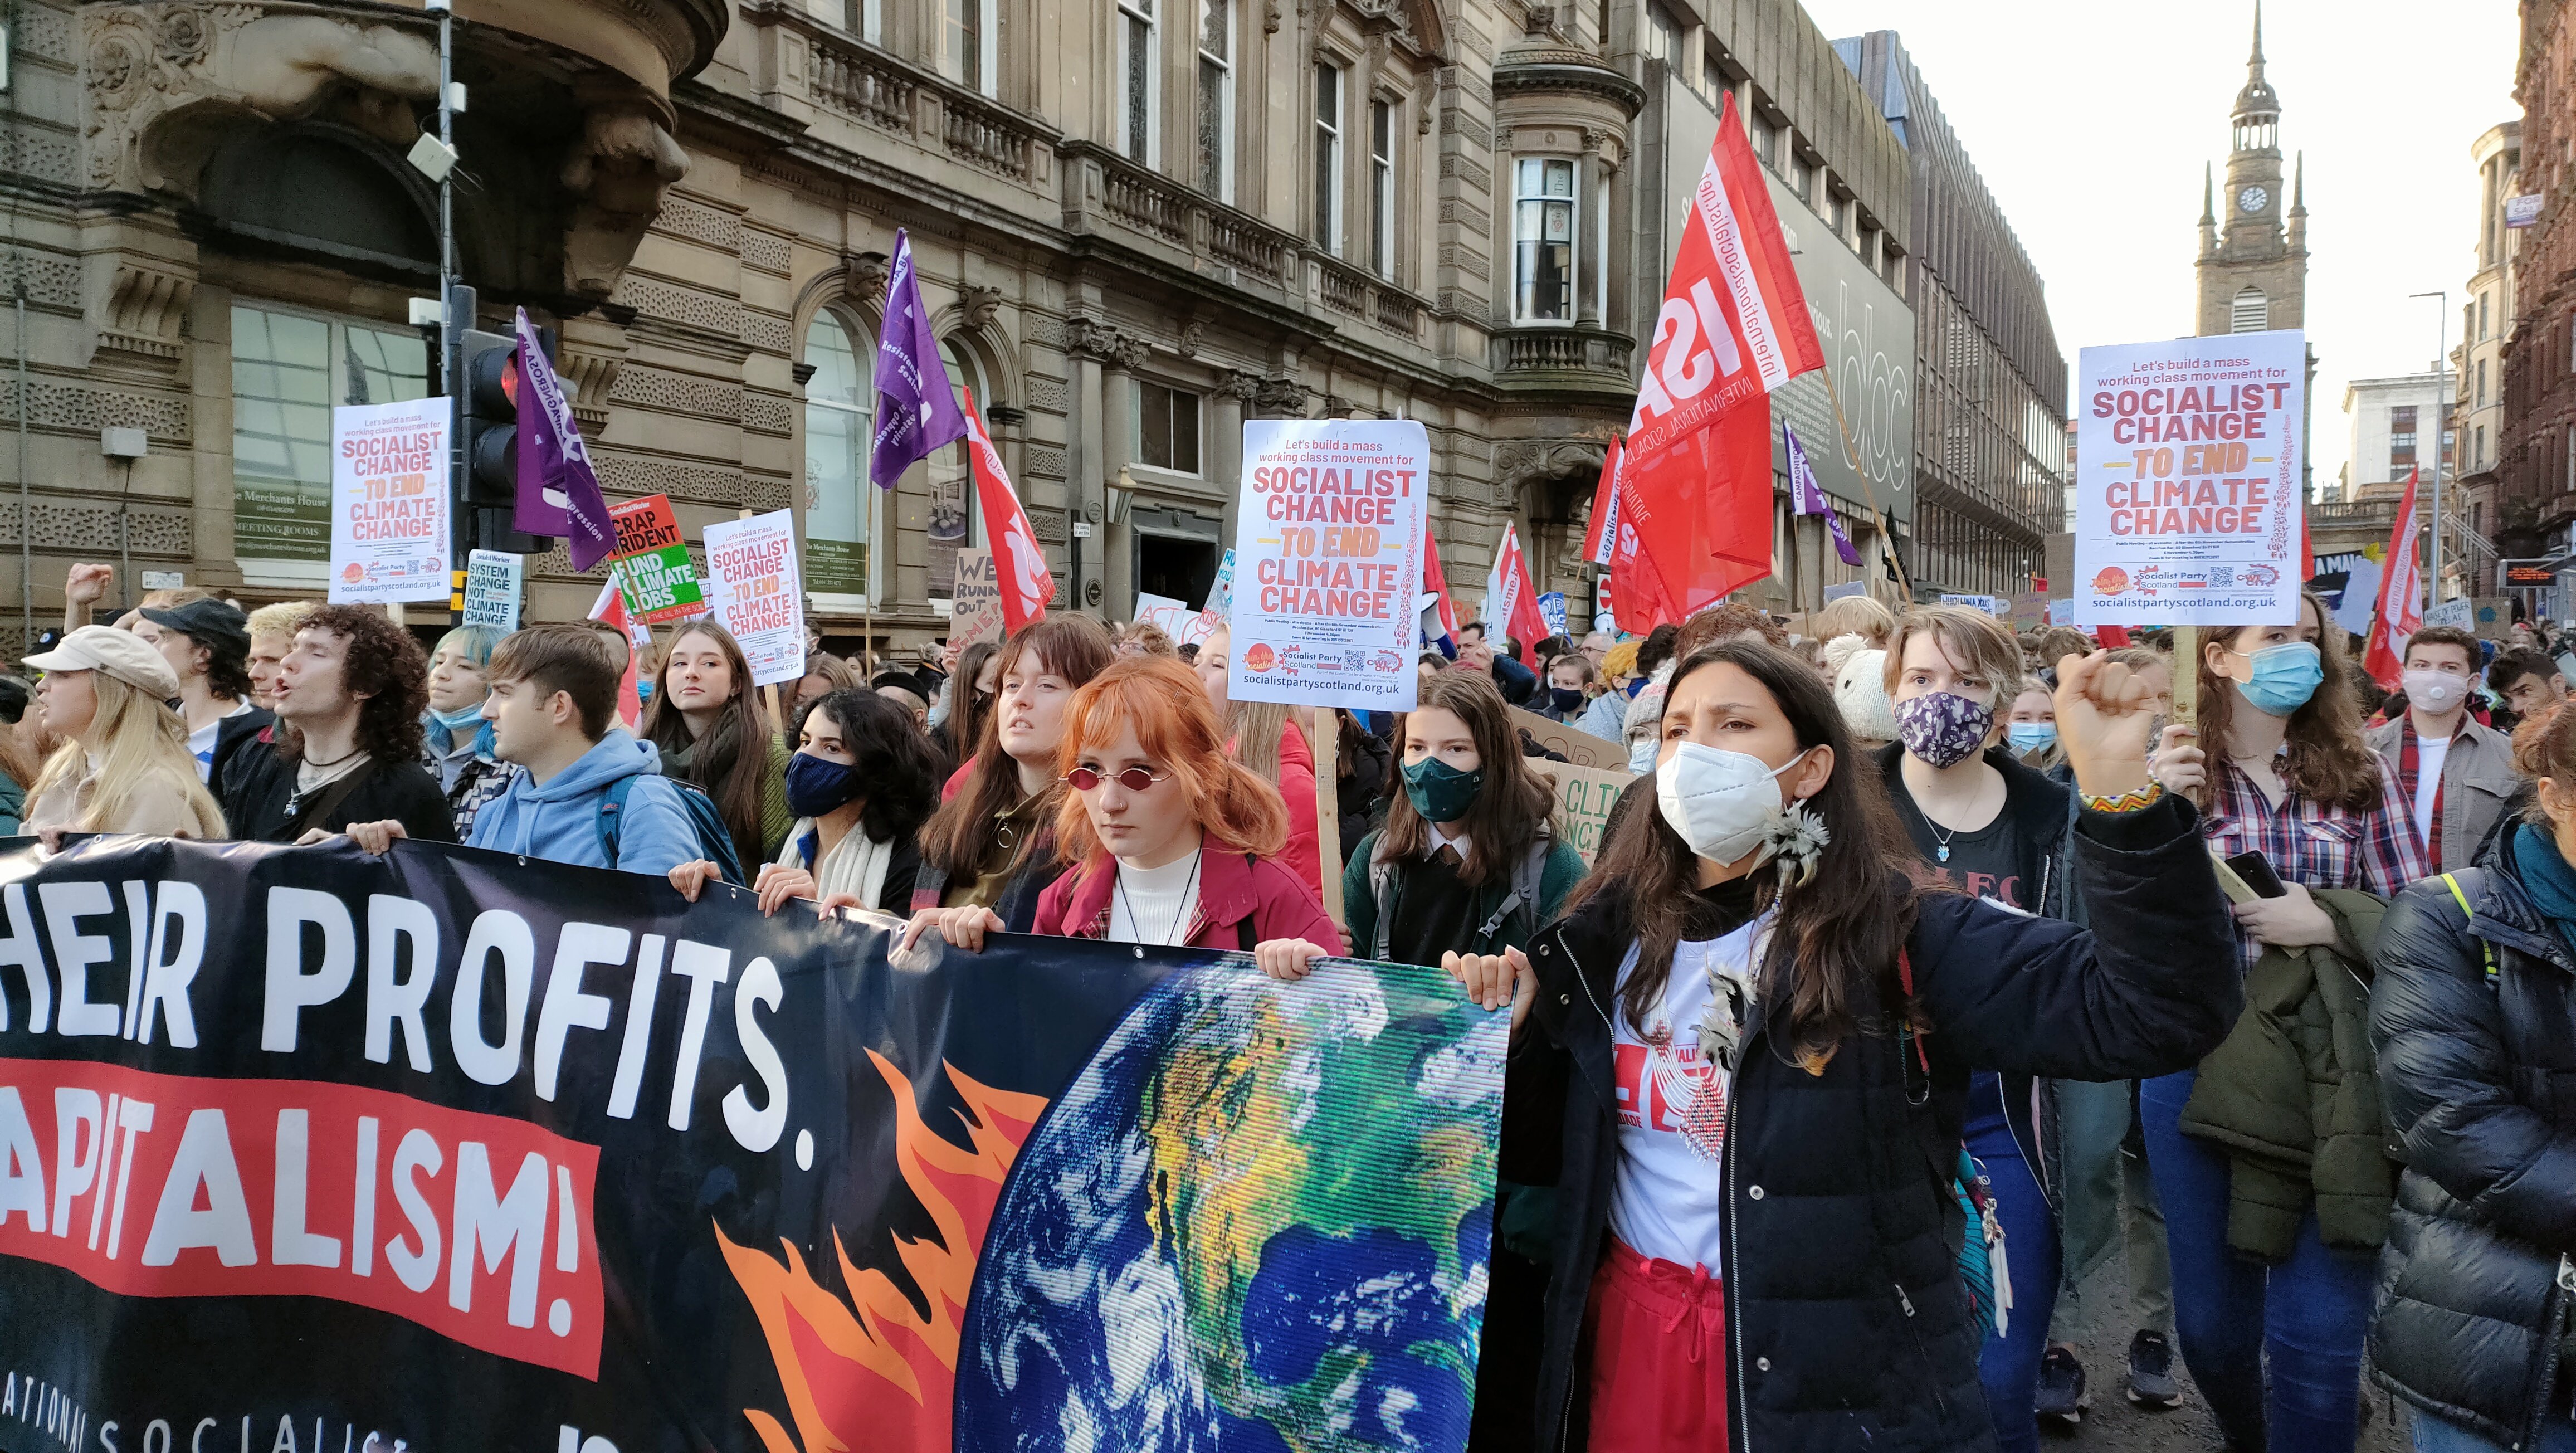 Climate activists, including hundreds of children, protest at George Square in Glasgow, demanding action on climate change from world leaders and politicians at COP26. Photo: Shamsuddin Illius 